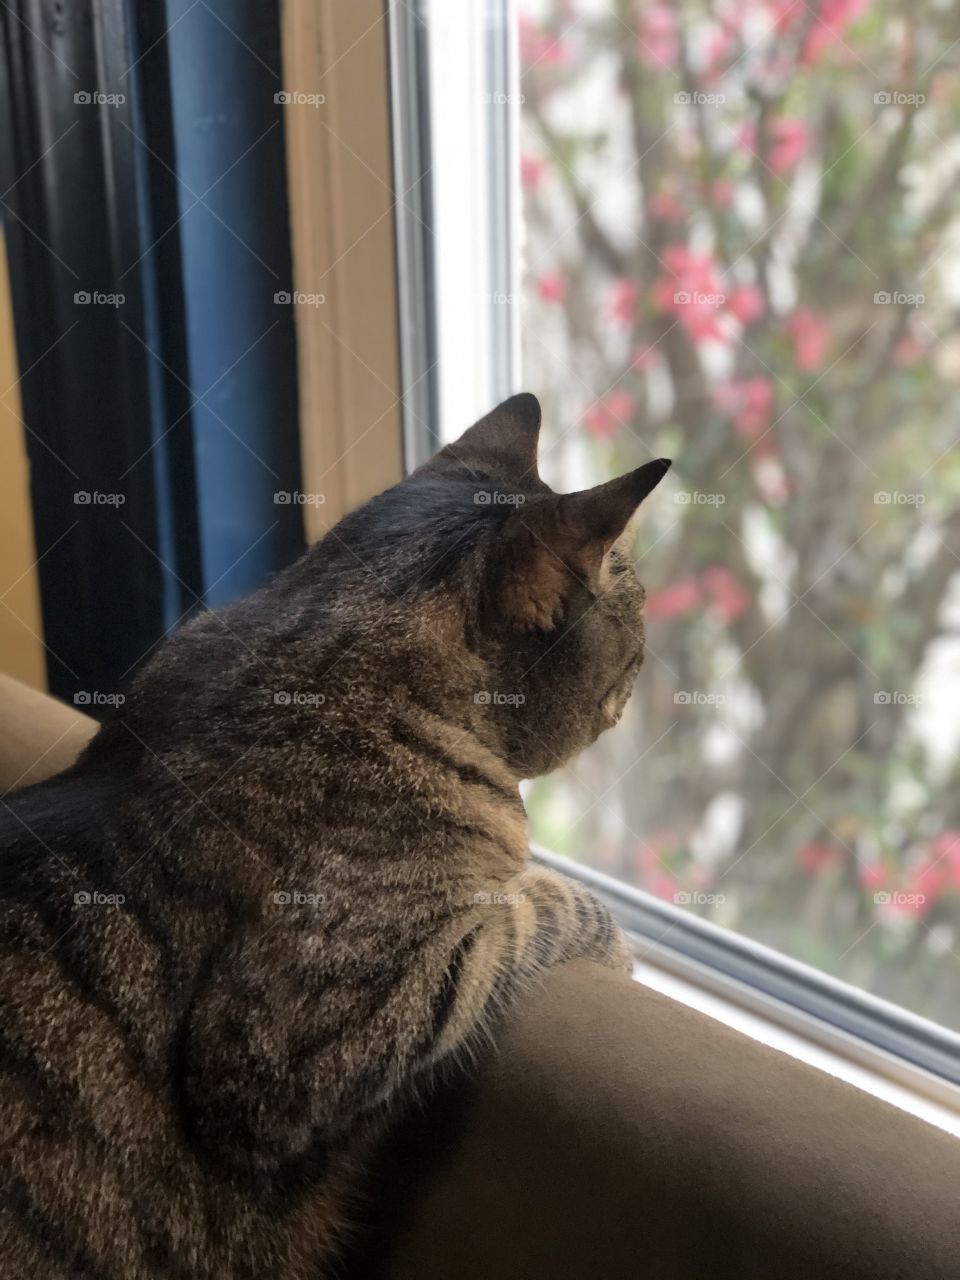 Cat looking at flowers our window 